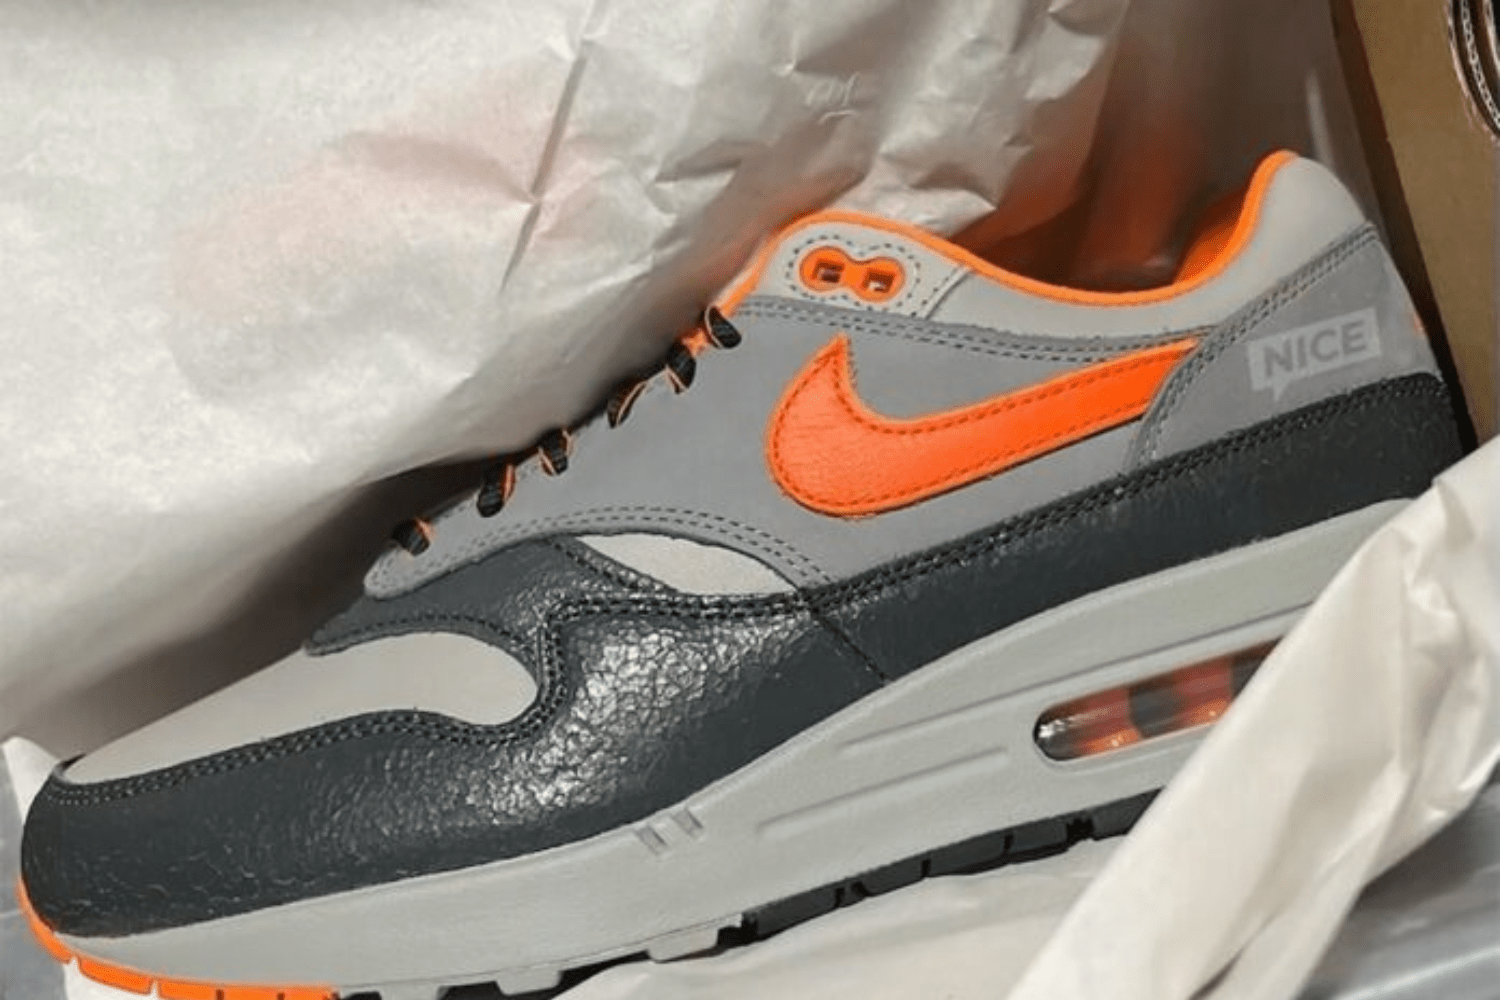 The HUF x Nike Air Max 1 'Brilliant Orange' is expected to drop in 2024